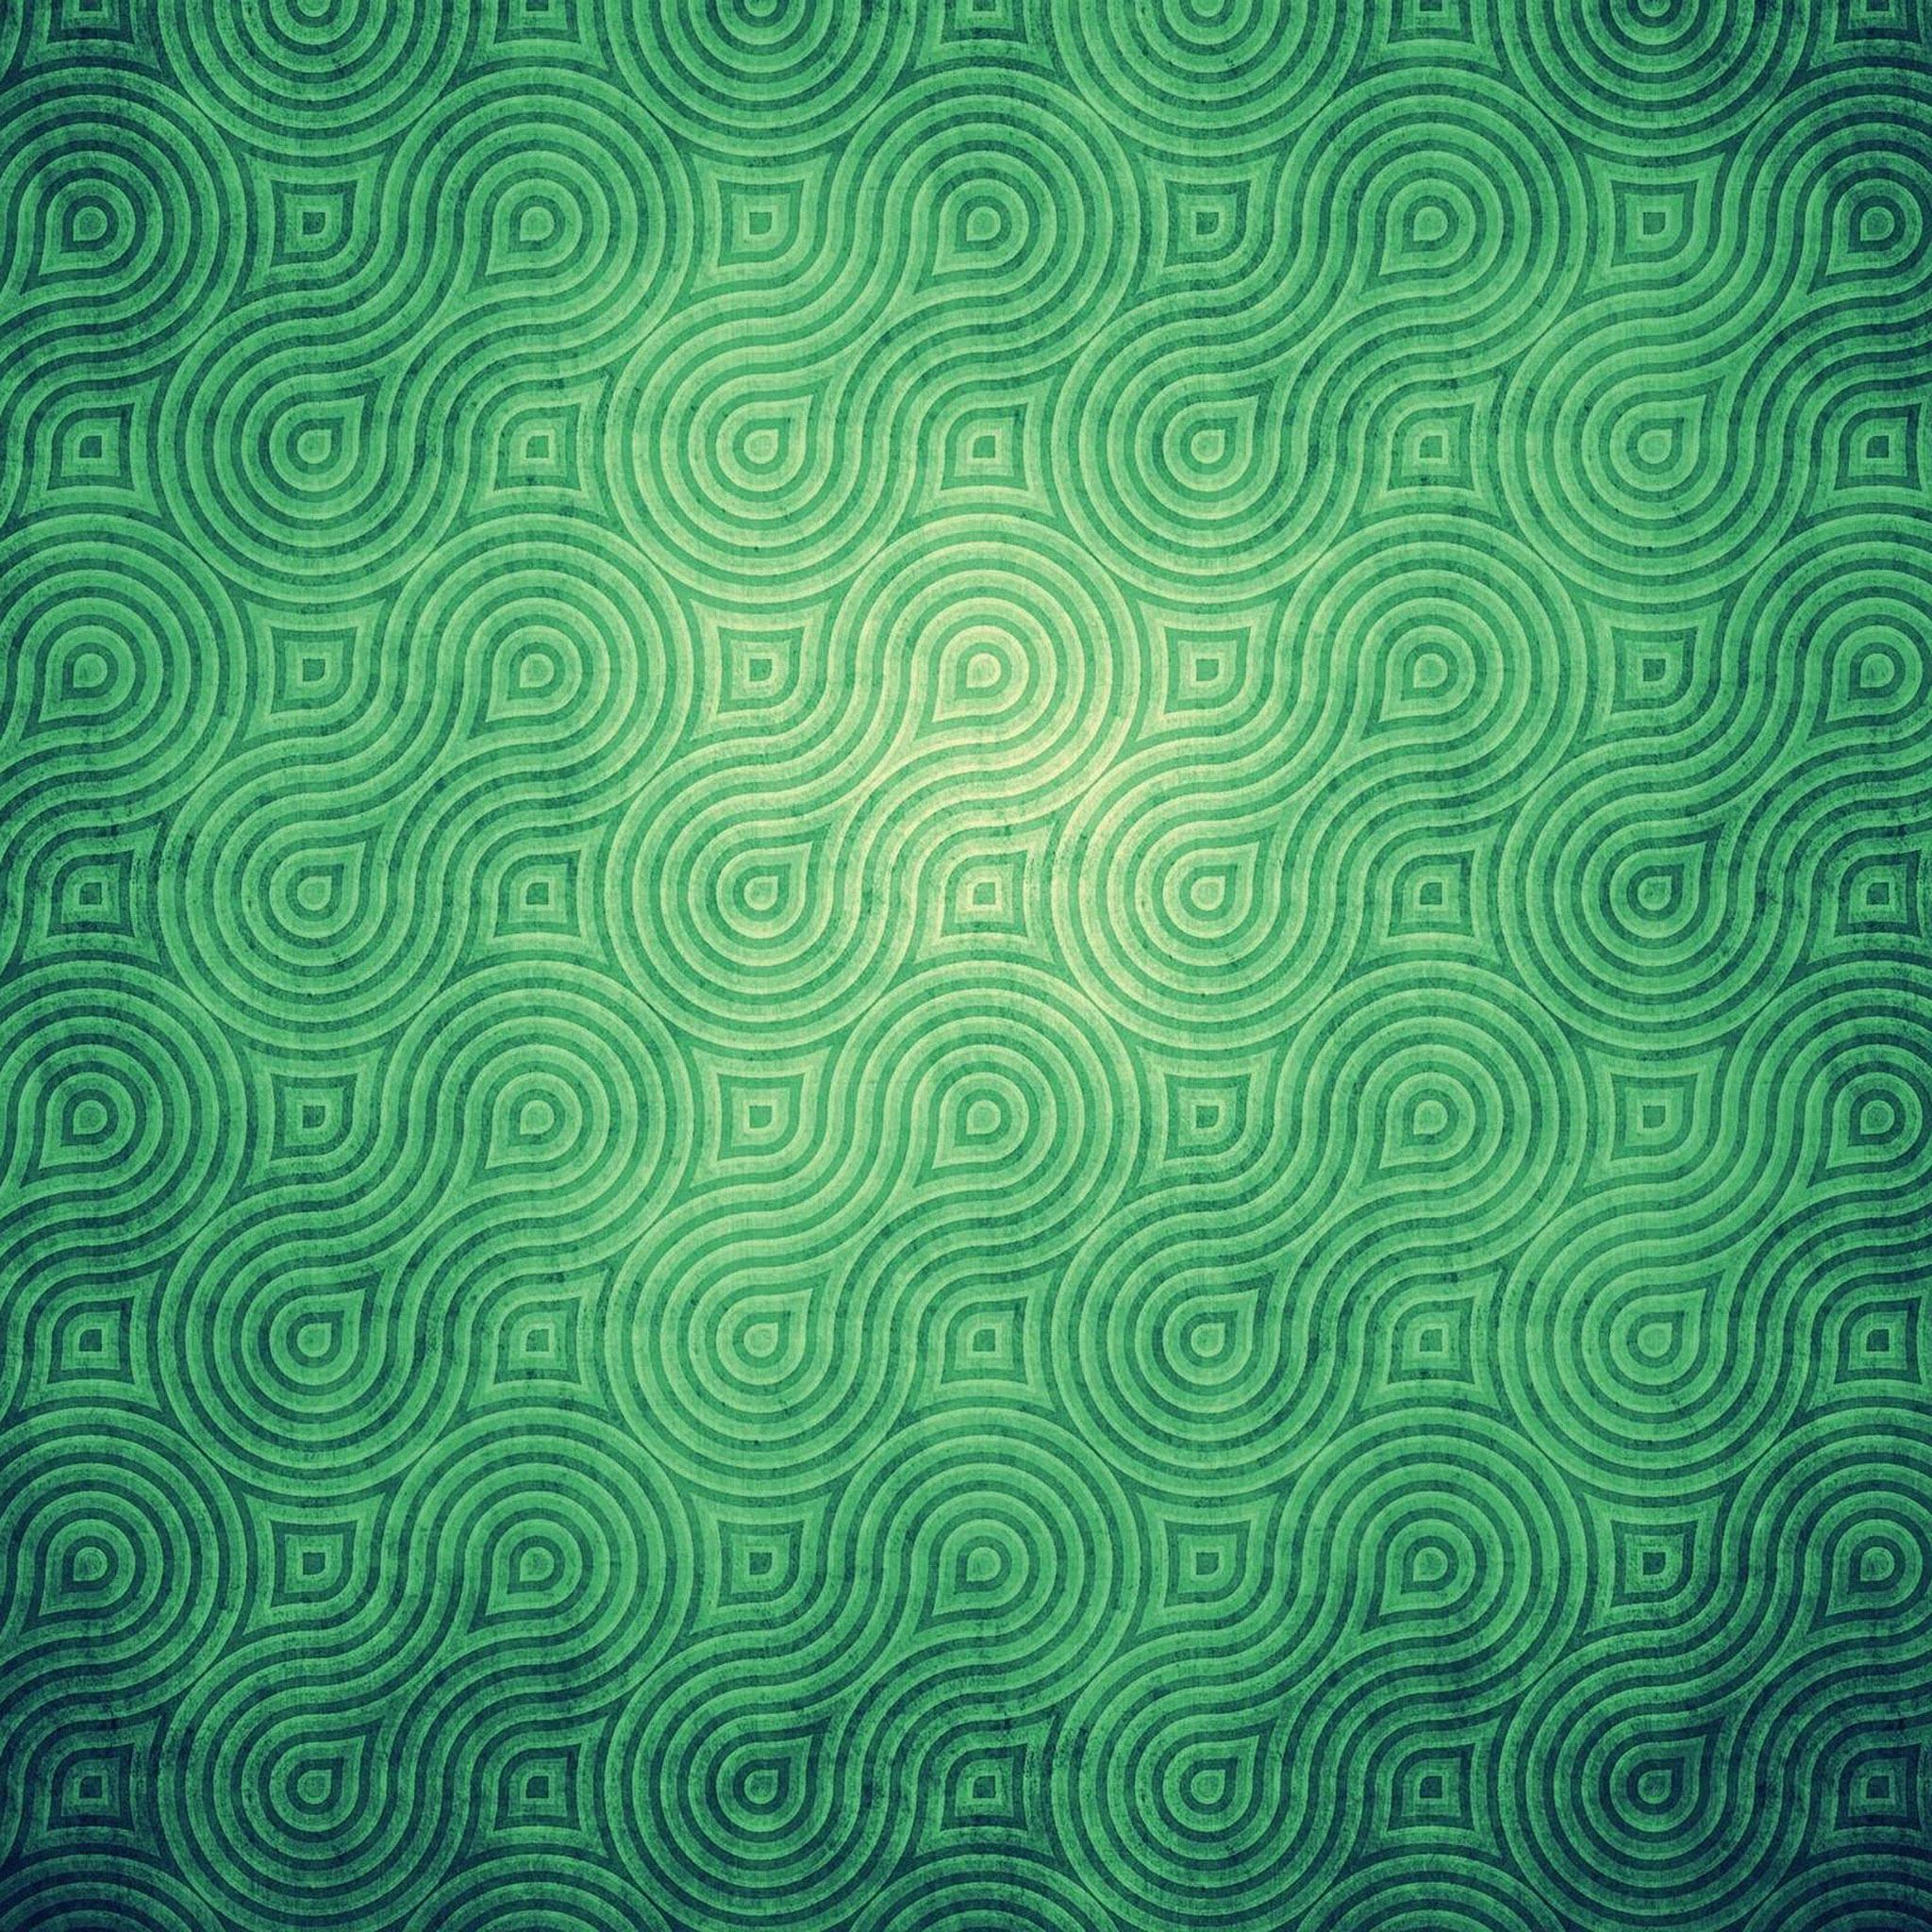 Abstract green swirl vortex pattern ipad air wallpapers free download